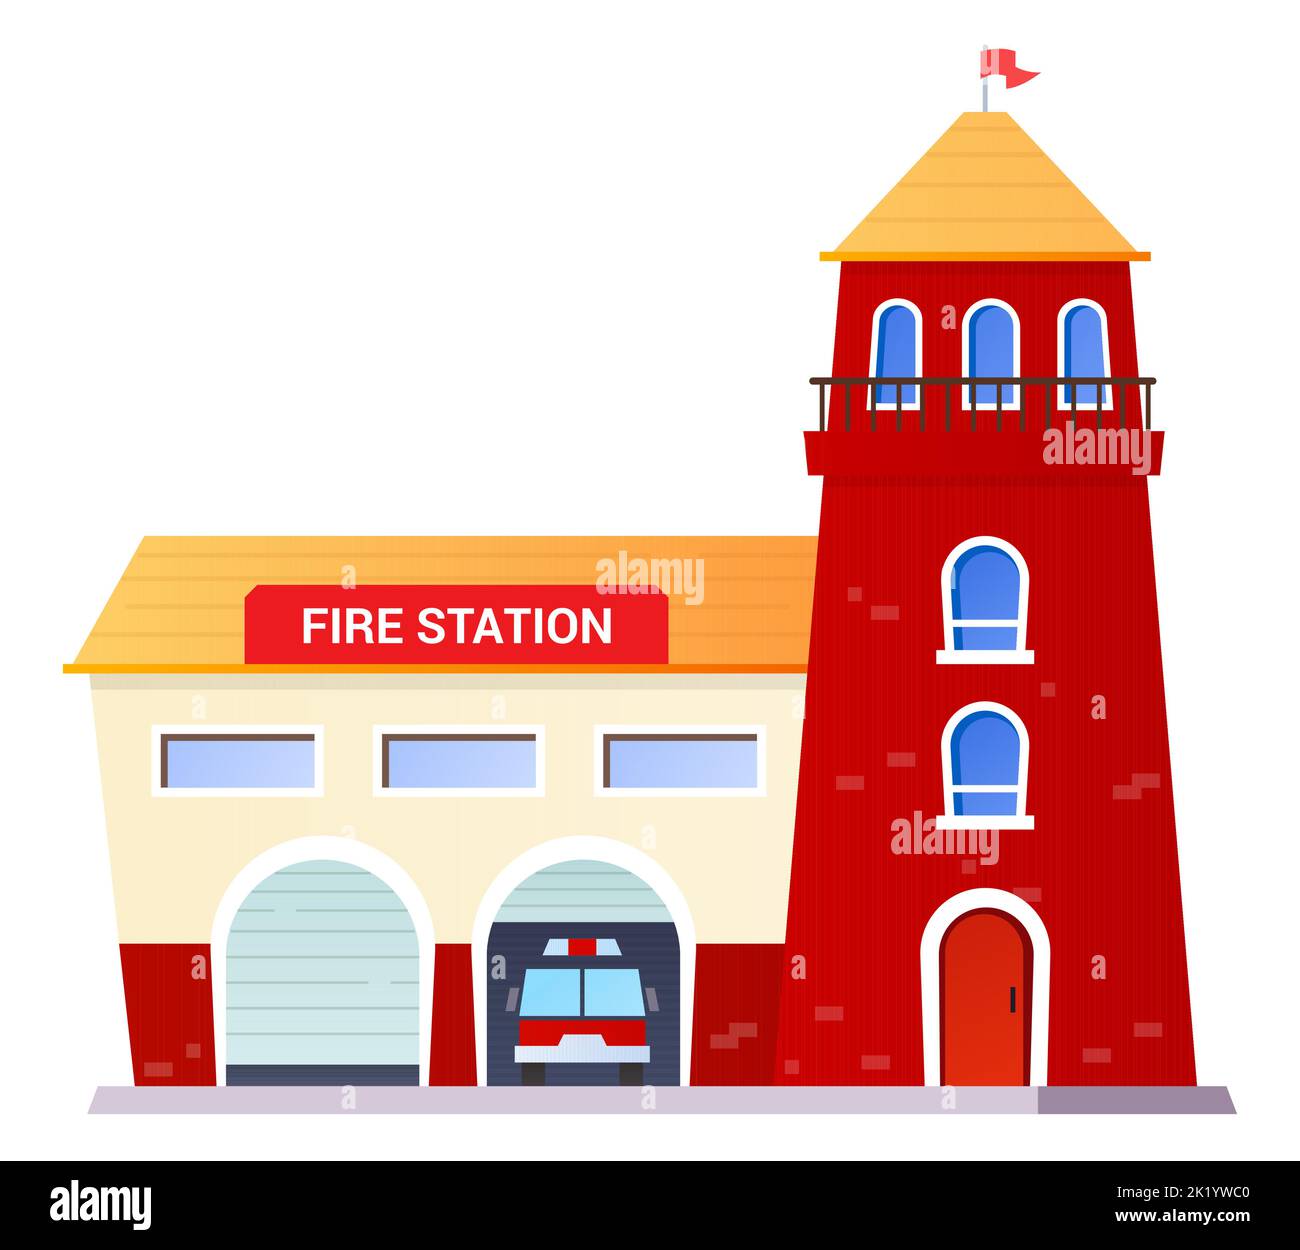 Fire station - modern flat design style single isolated image Stock Vector